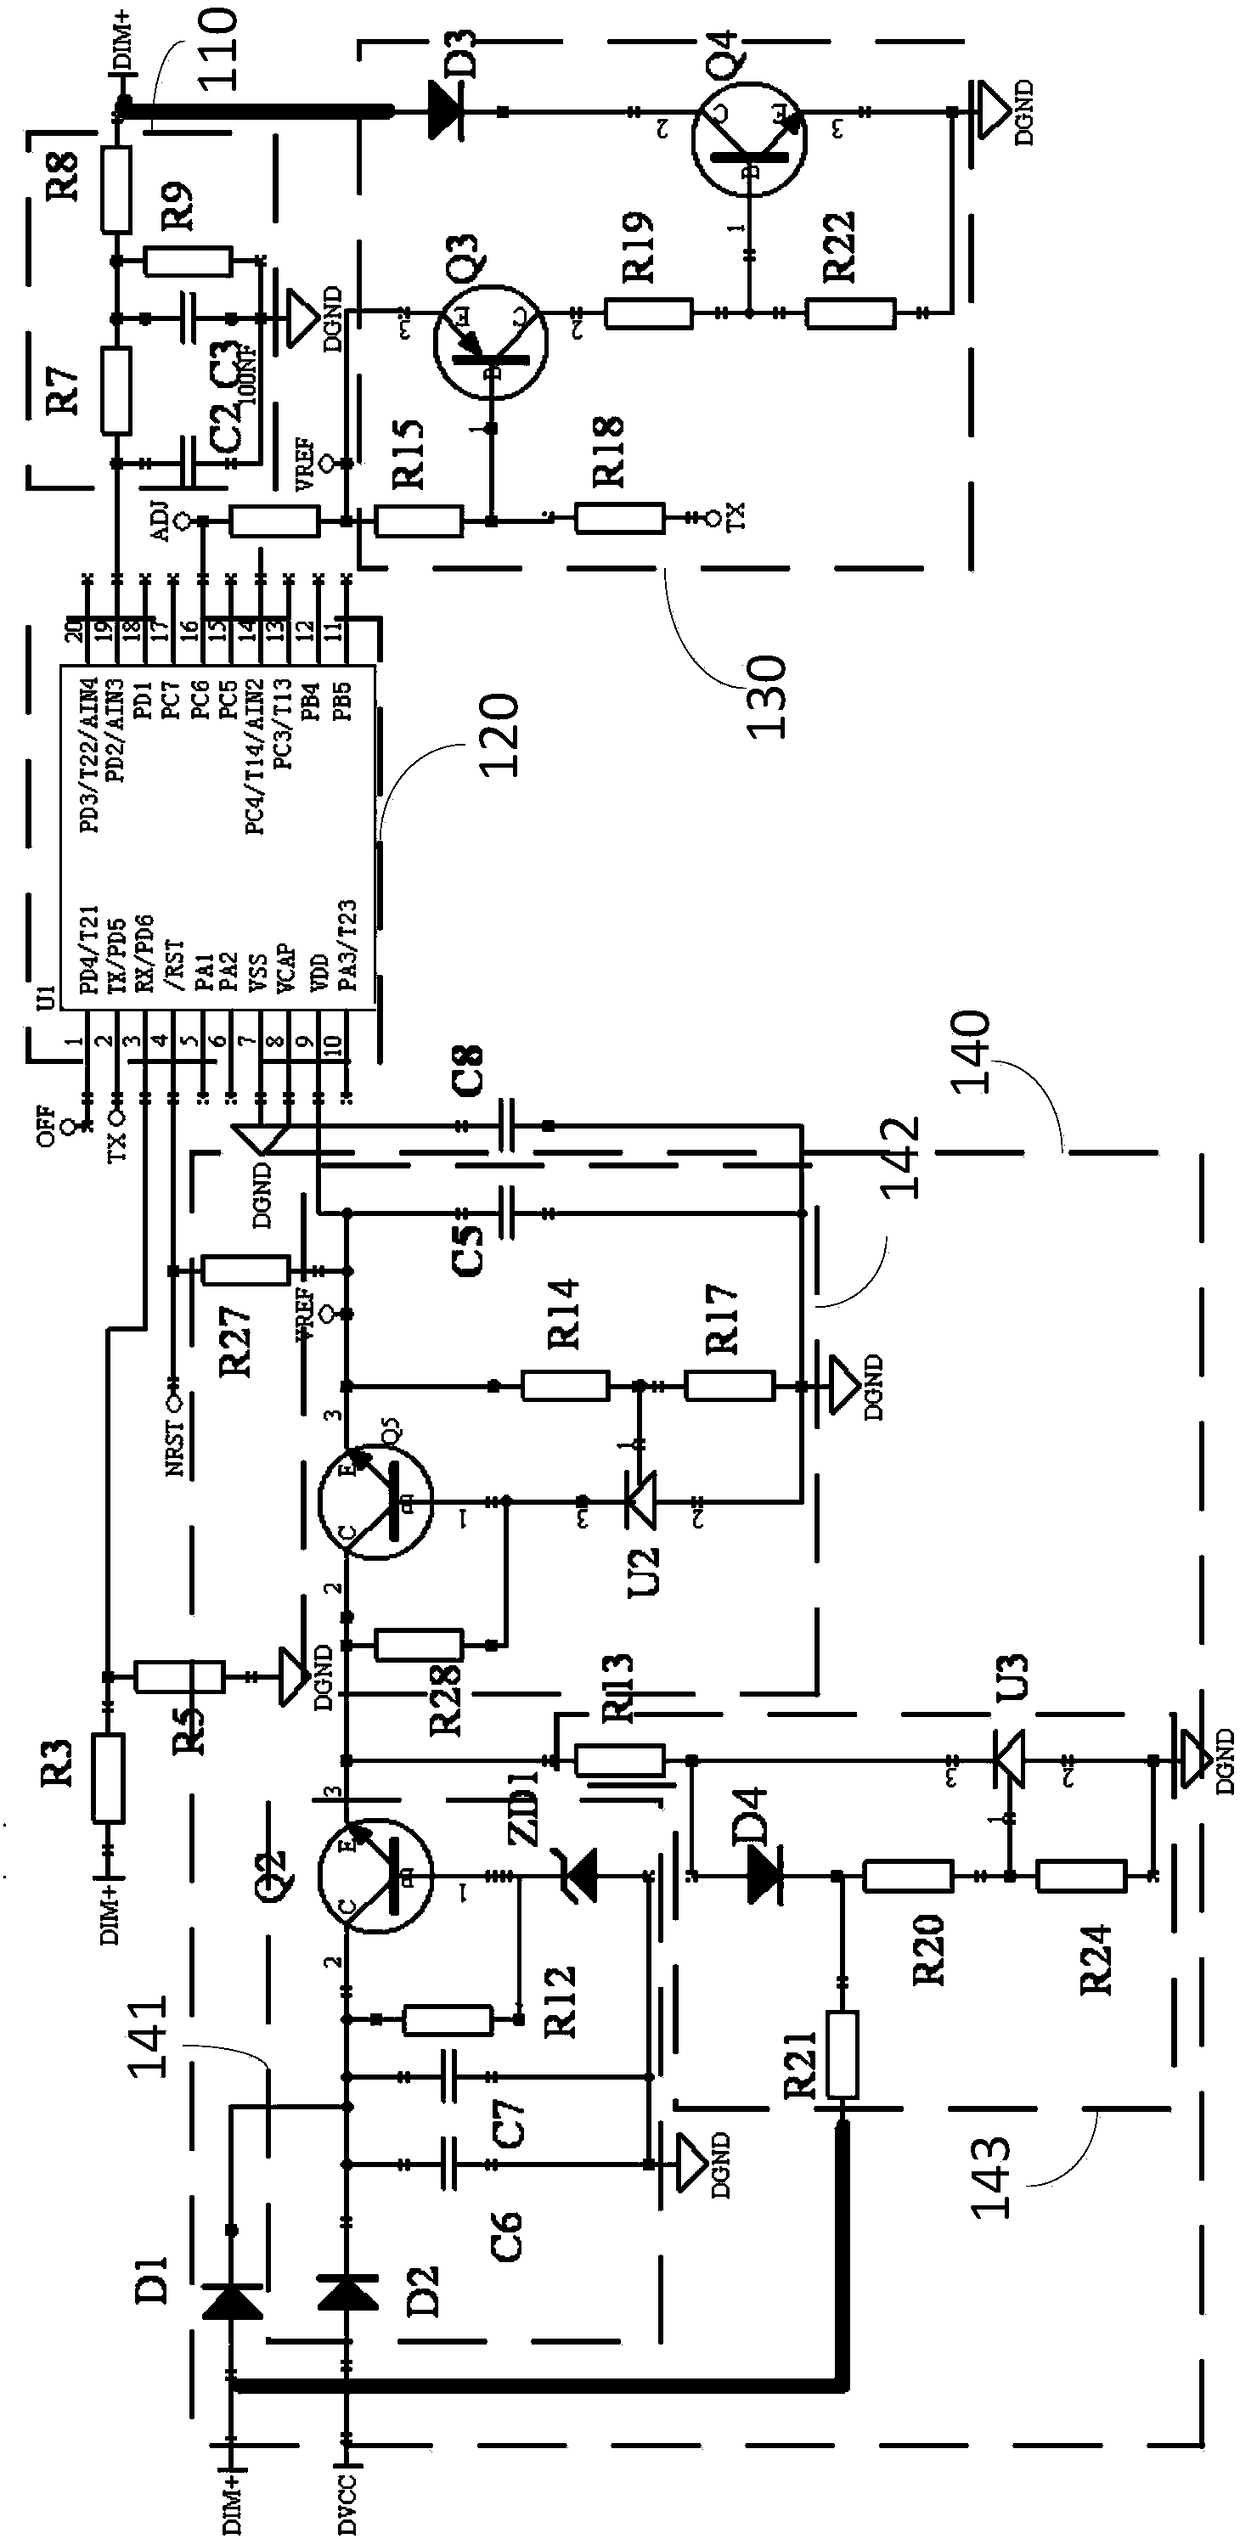 LED driving power supply circuit